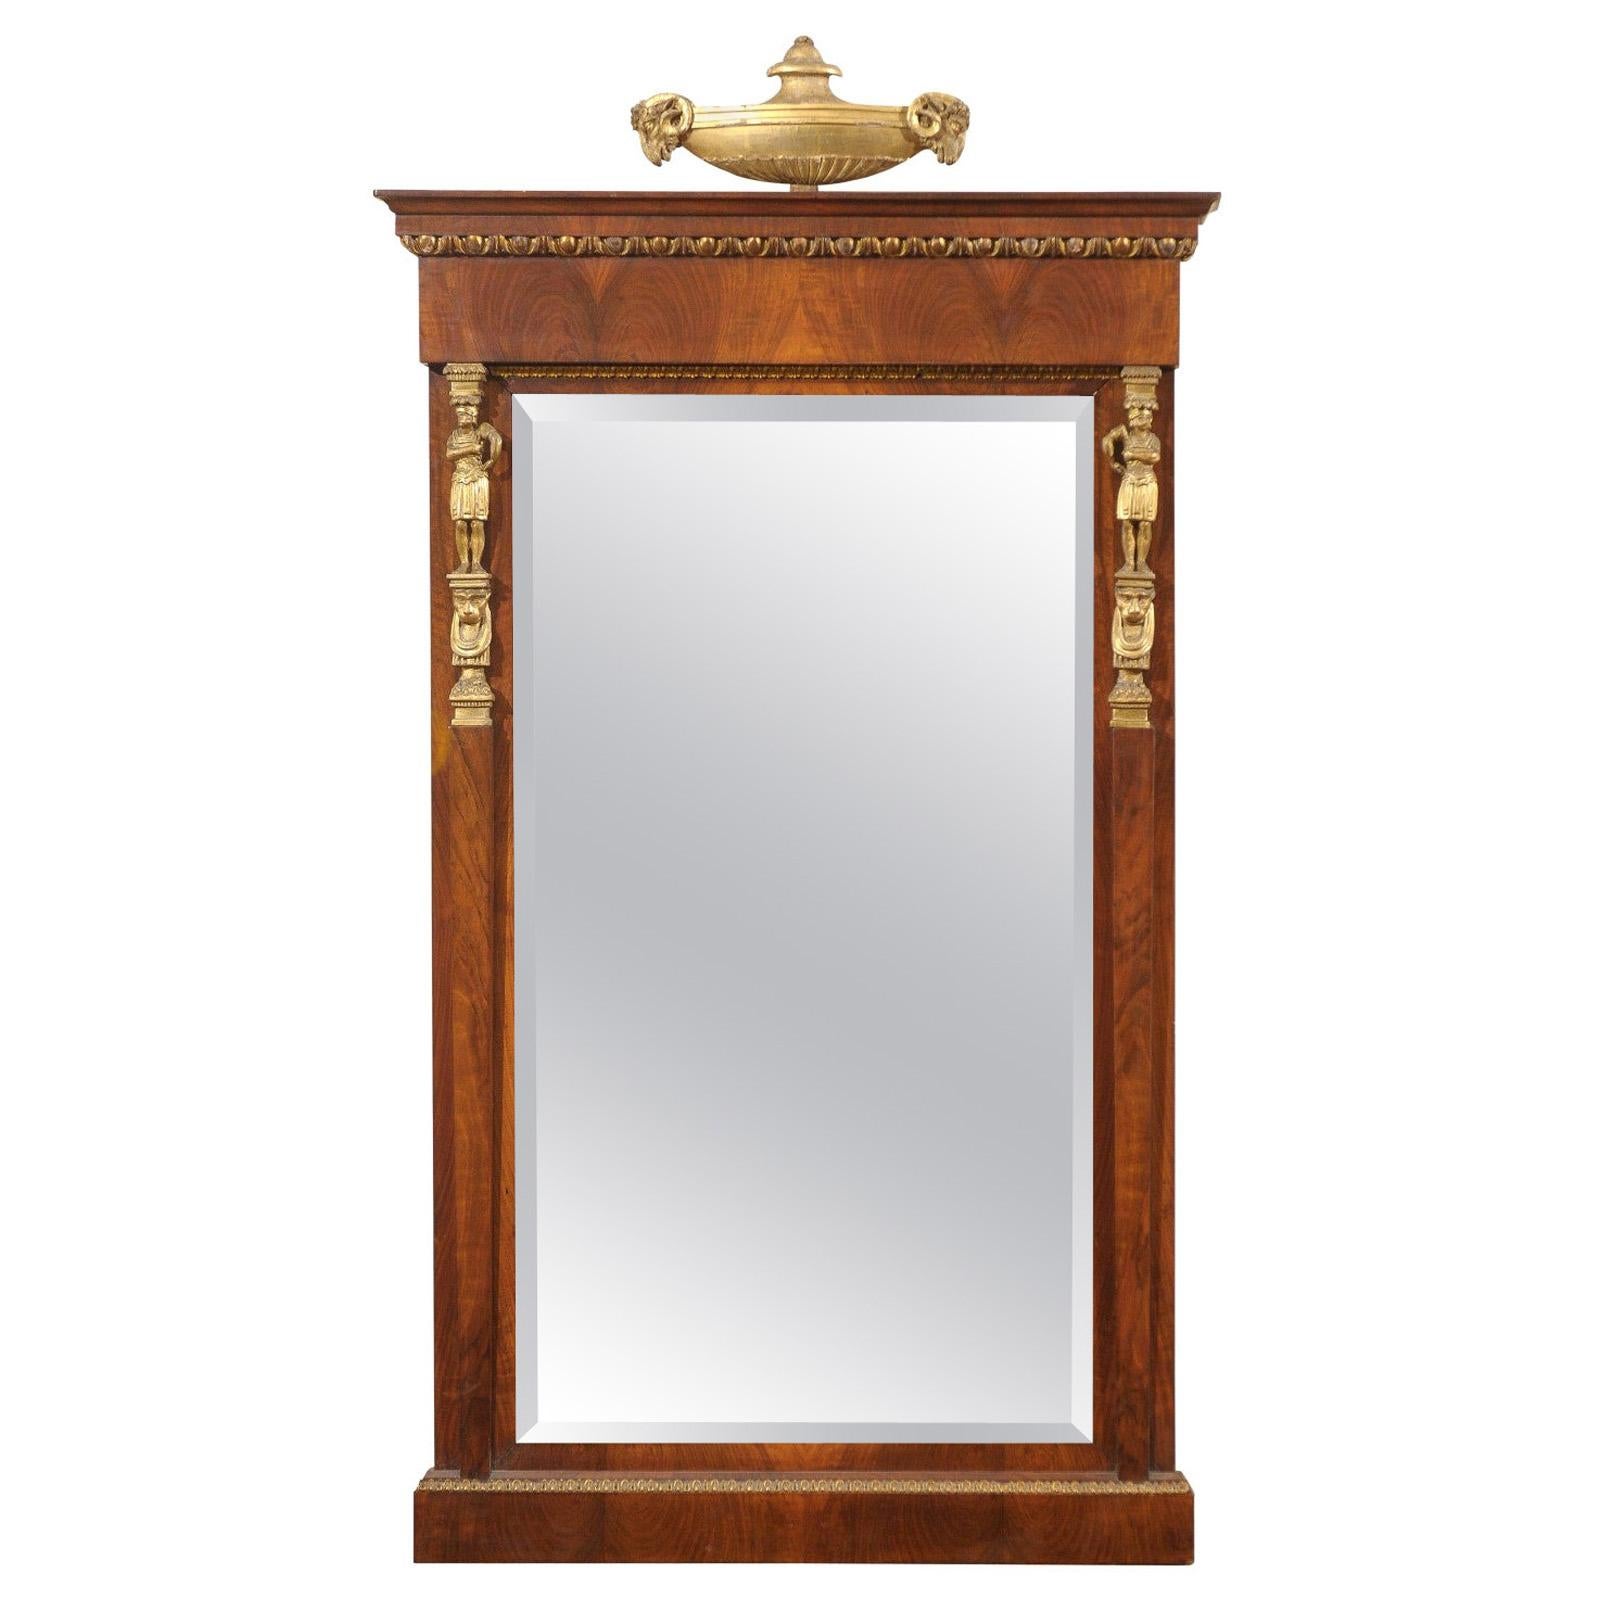 Empire Period Mahogany Mirror with Urn Motif and Gilt Accents France, circa 1810